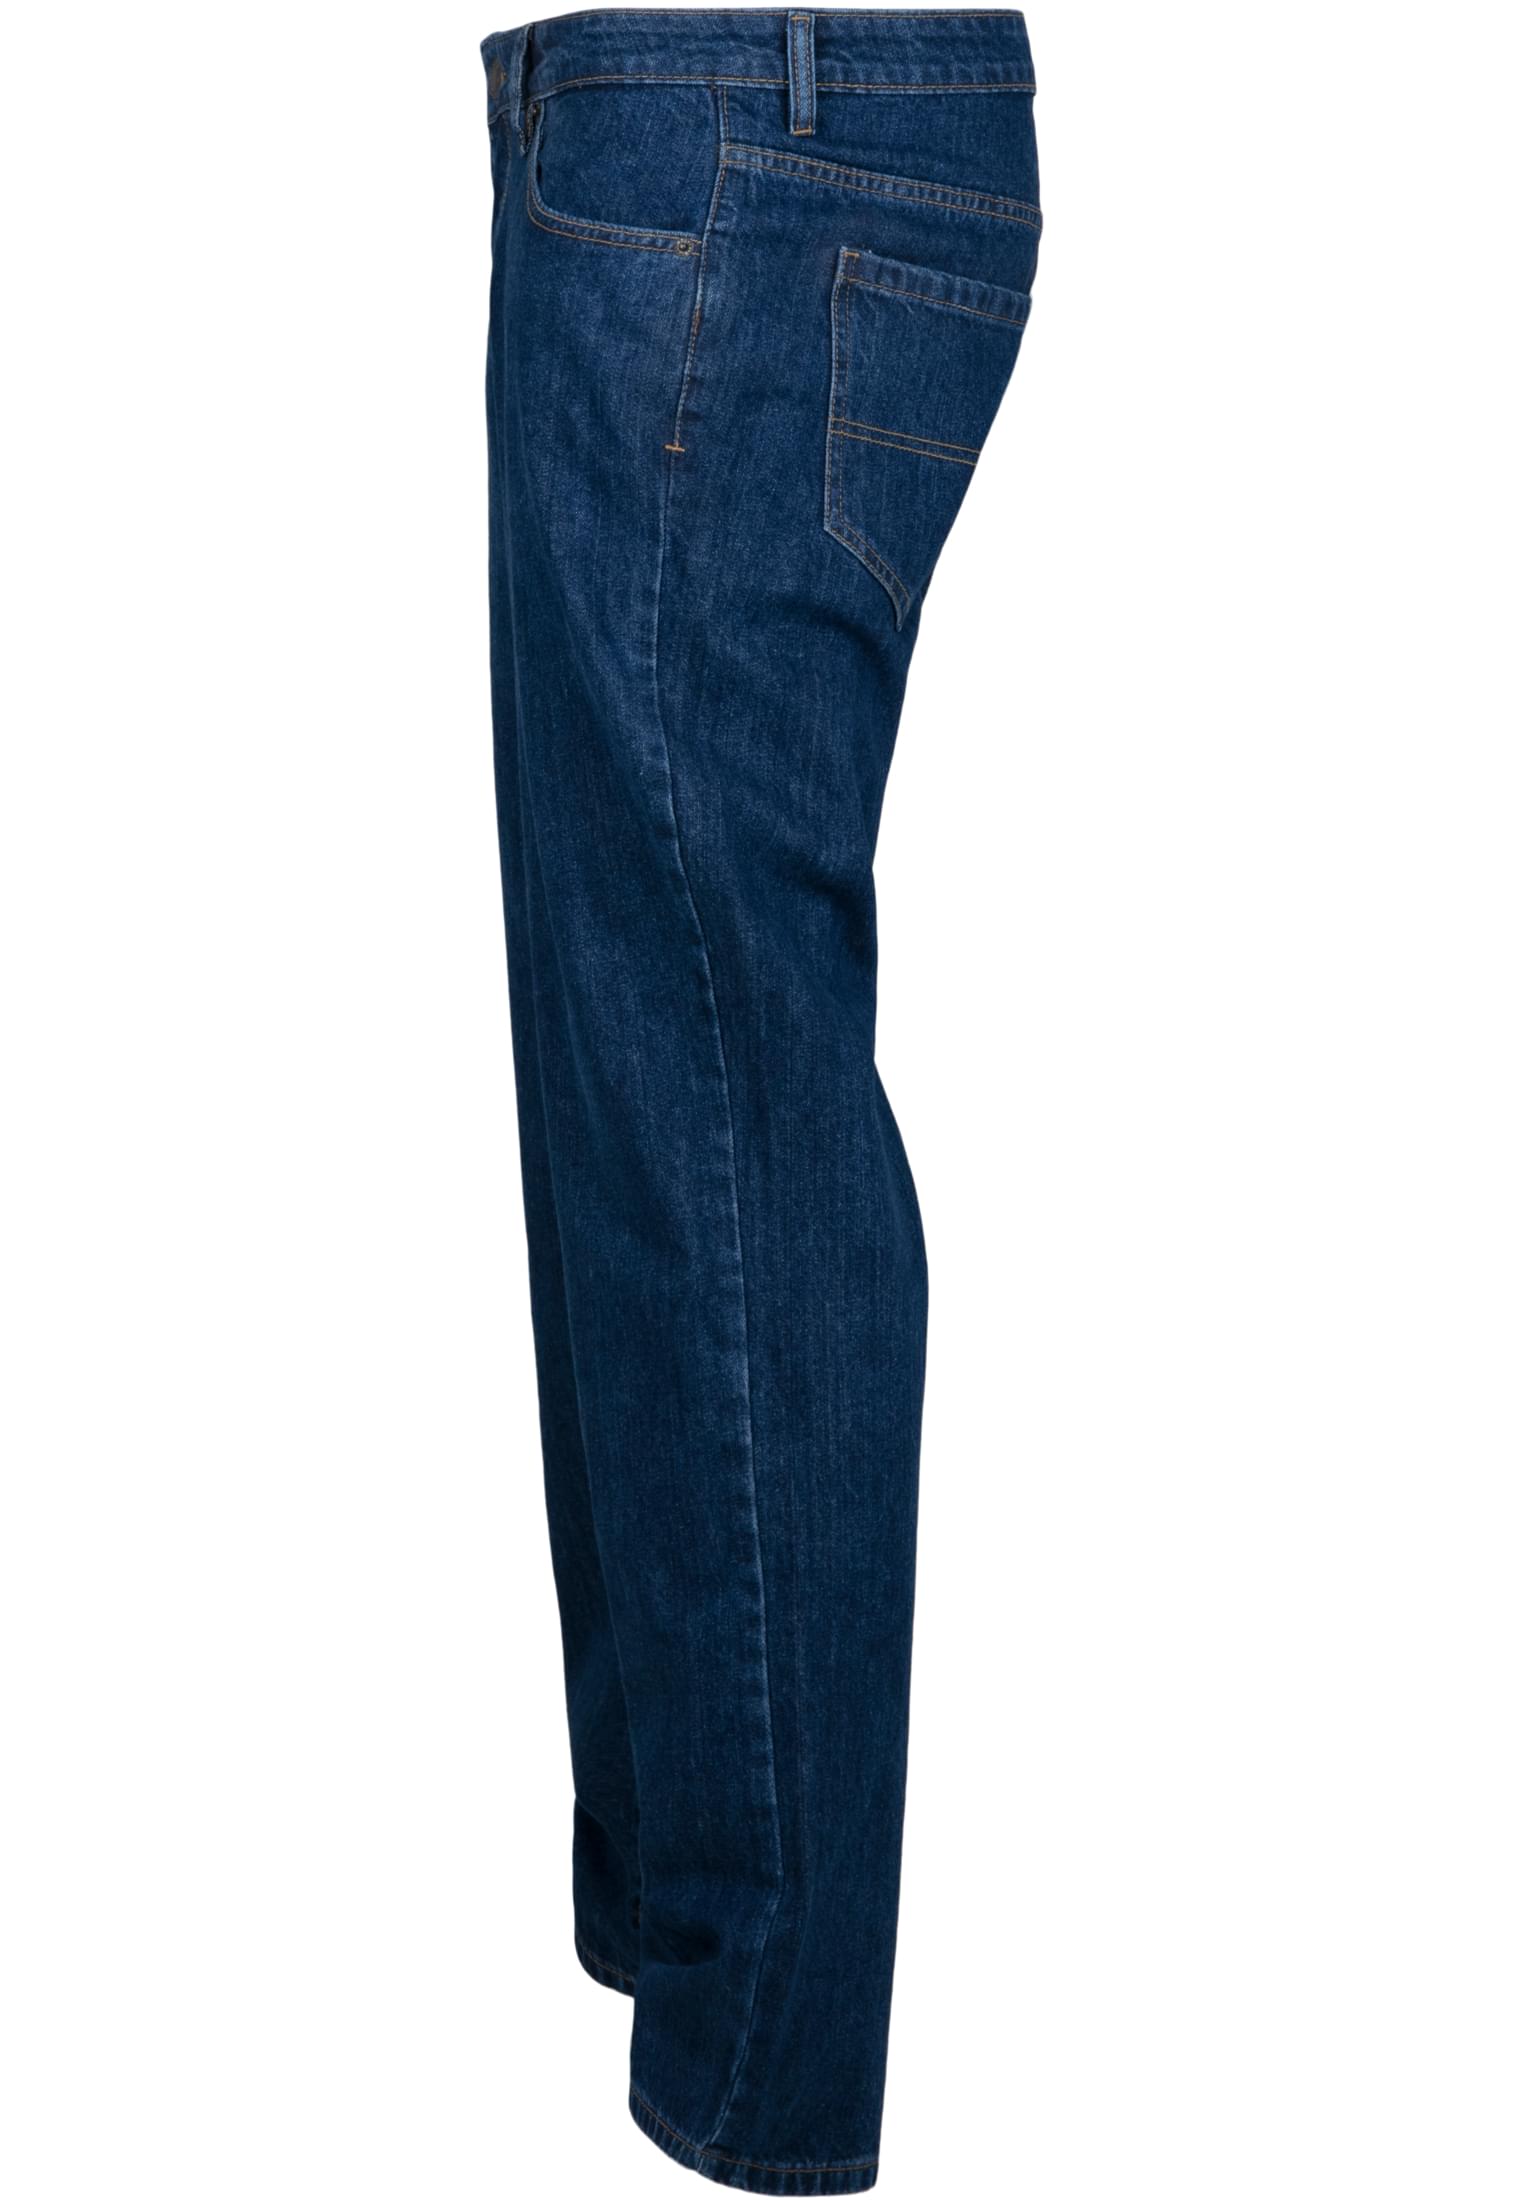 Hosen Loose Fit Jeans in Farbe mid indigo